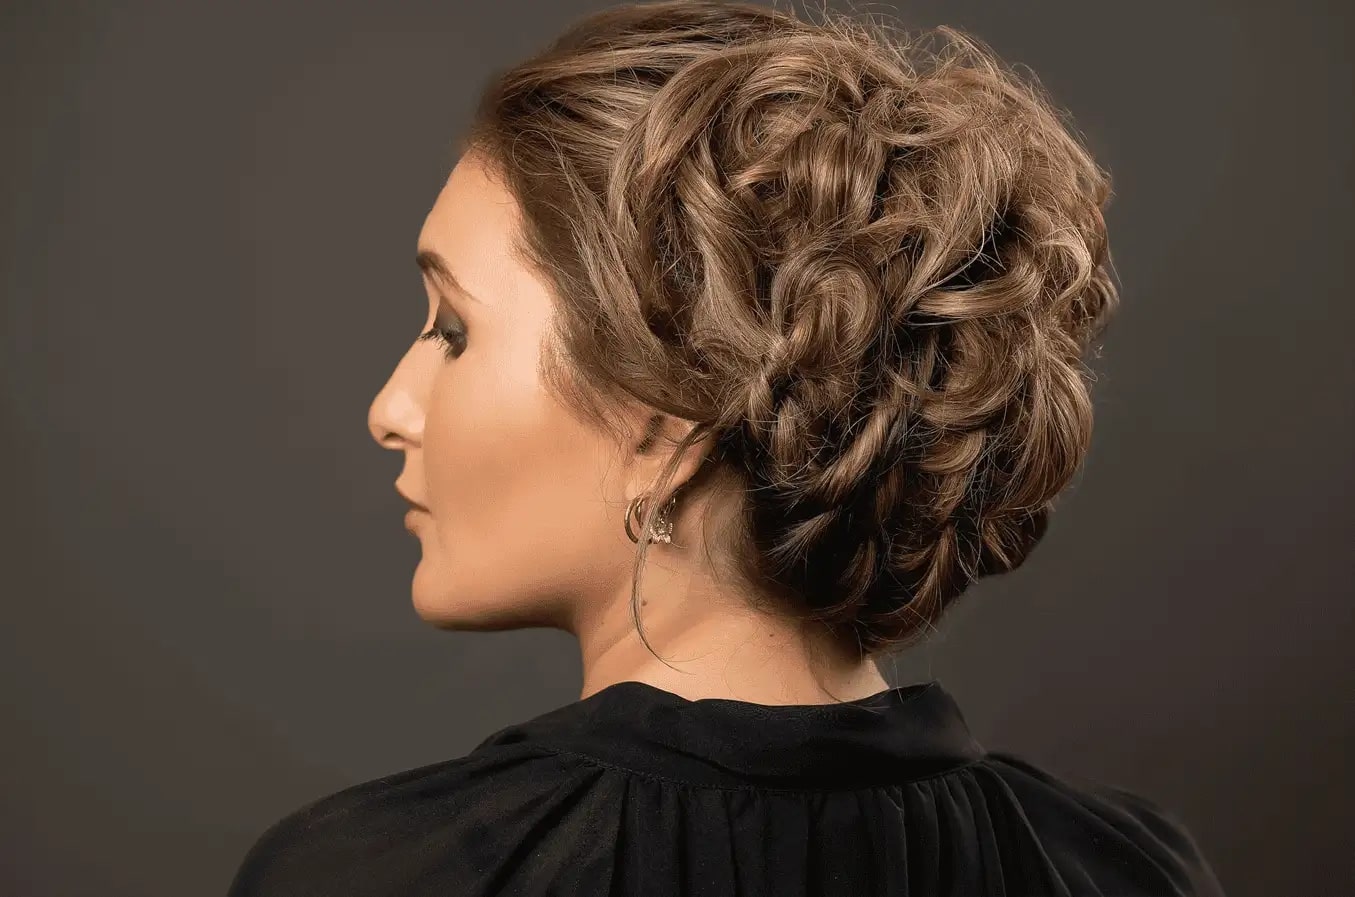 Women’s hairstyle 4